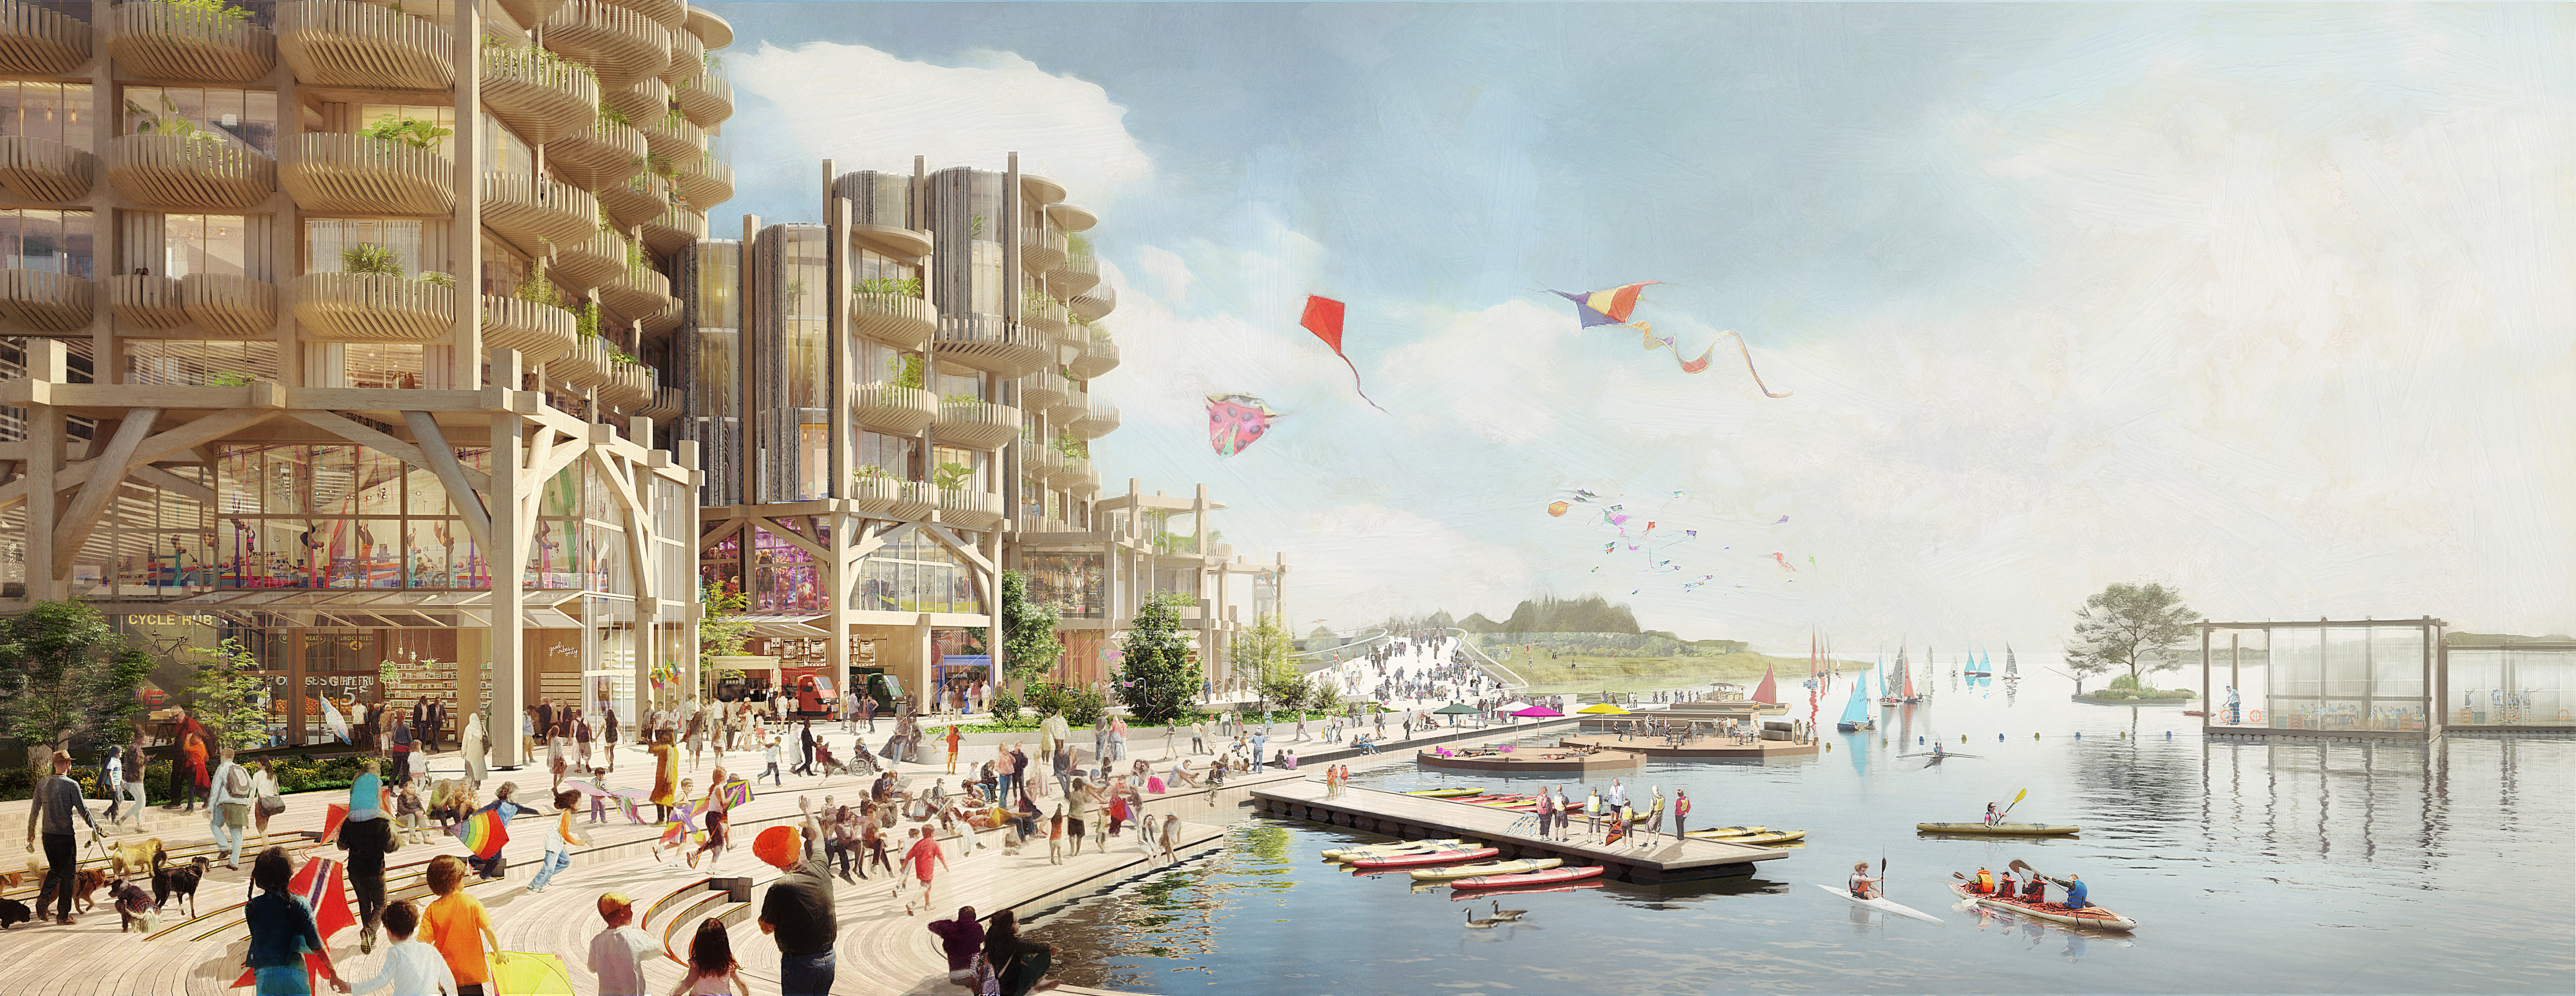 A rendering of an idealized neighborhood with modern buildings made from timber and people walking on a waterfront promenade and flying kites.